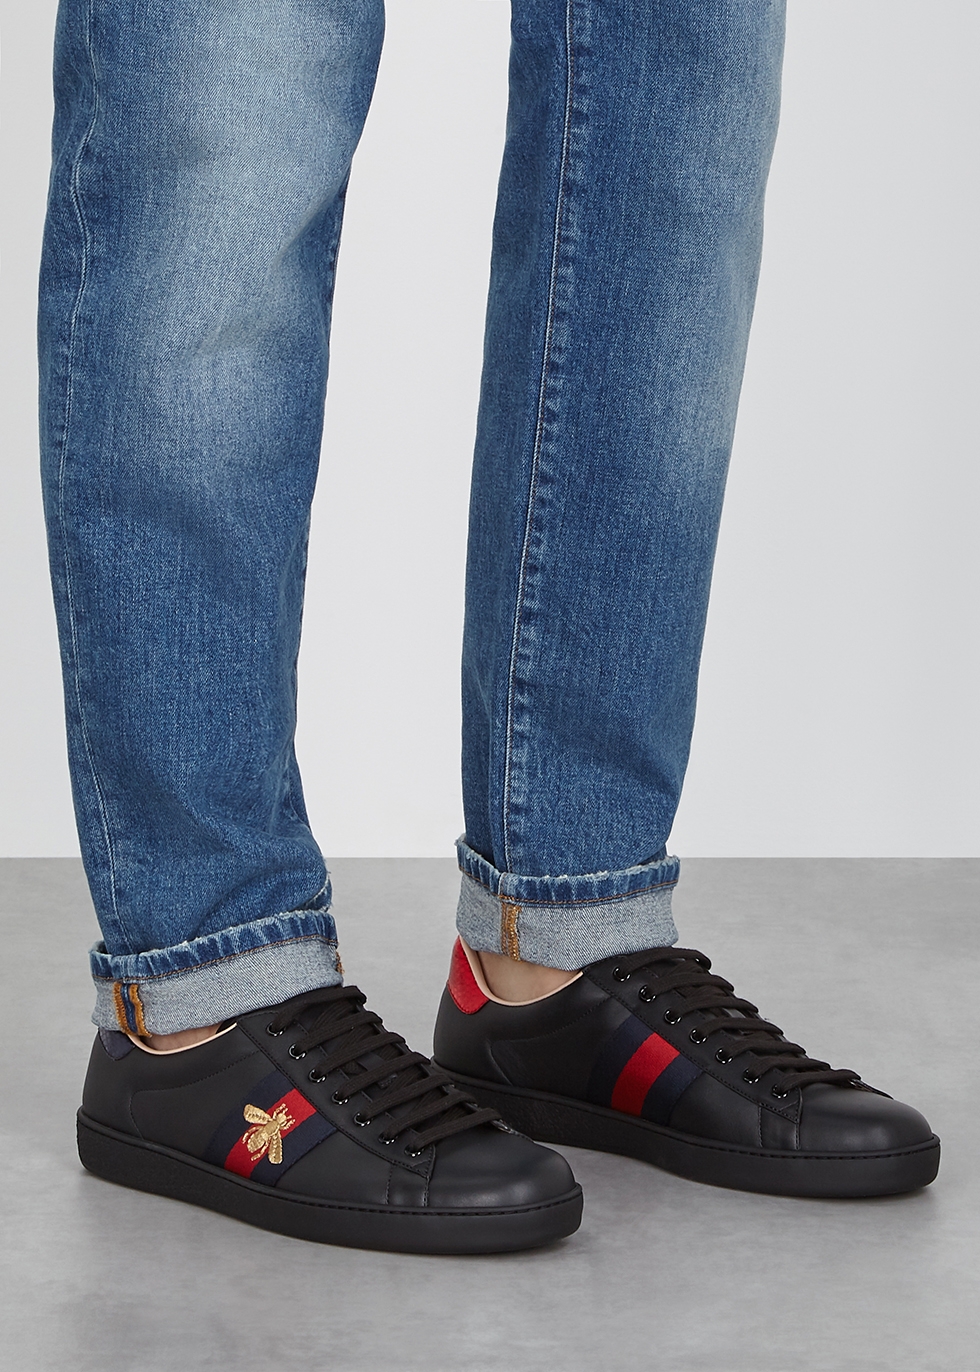 gucci black leather sneakers